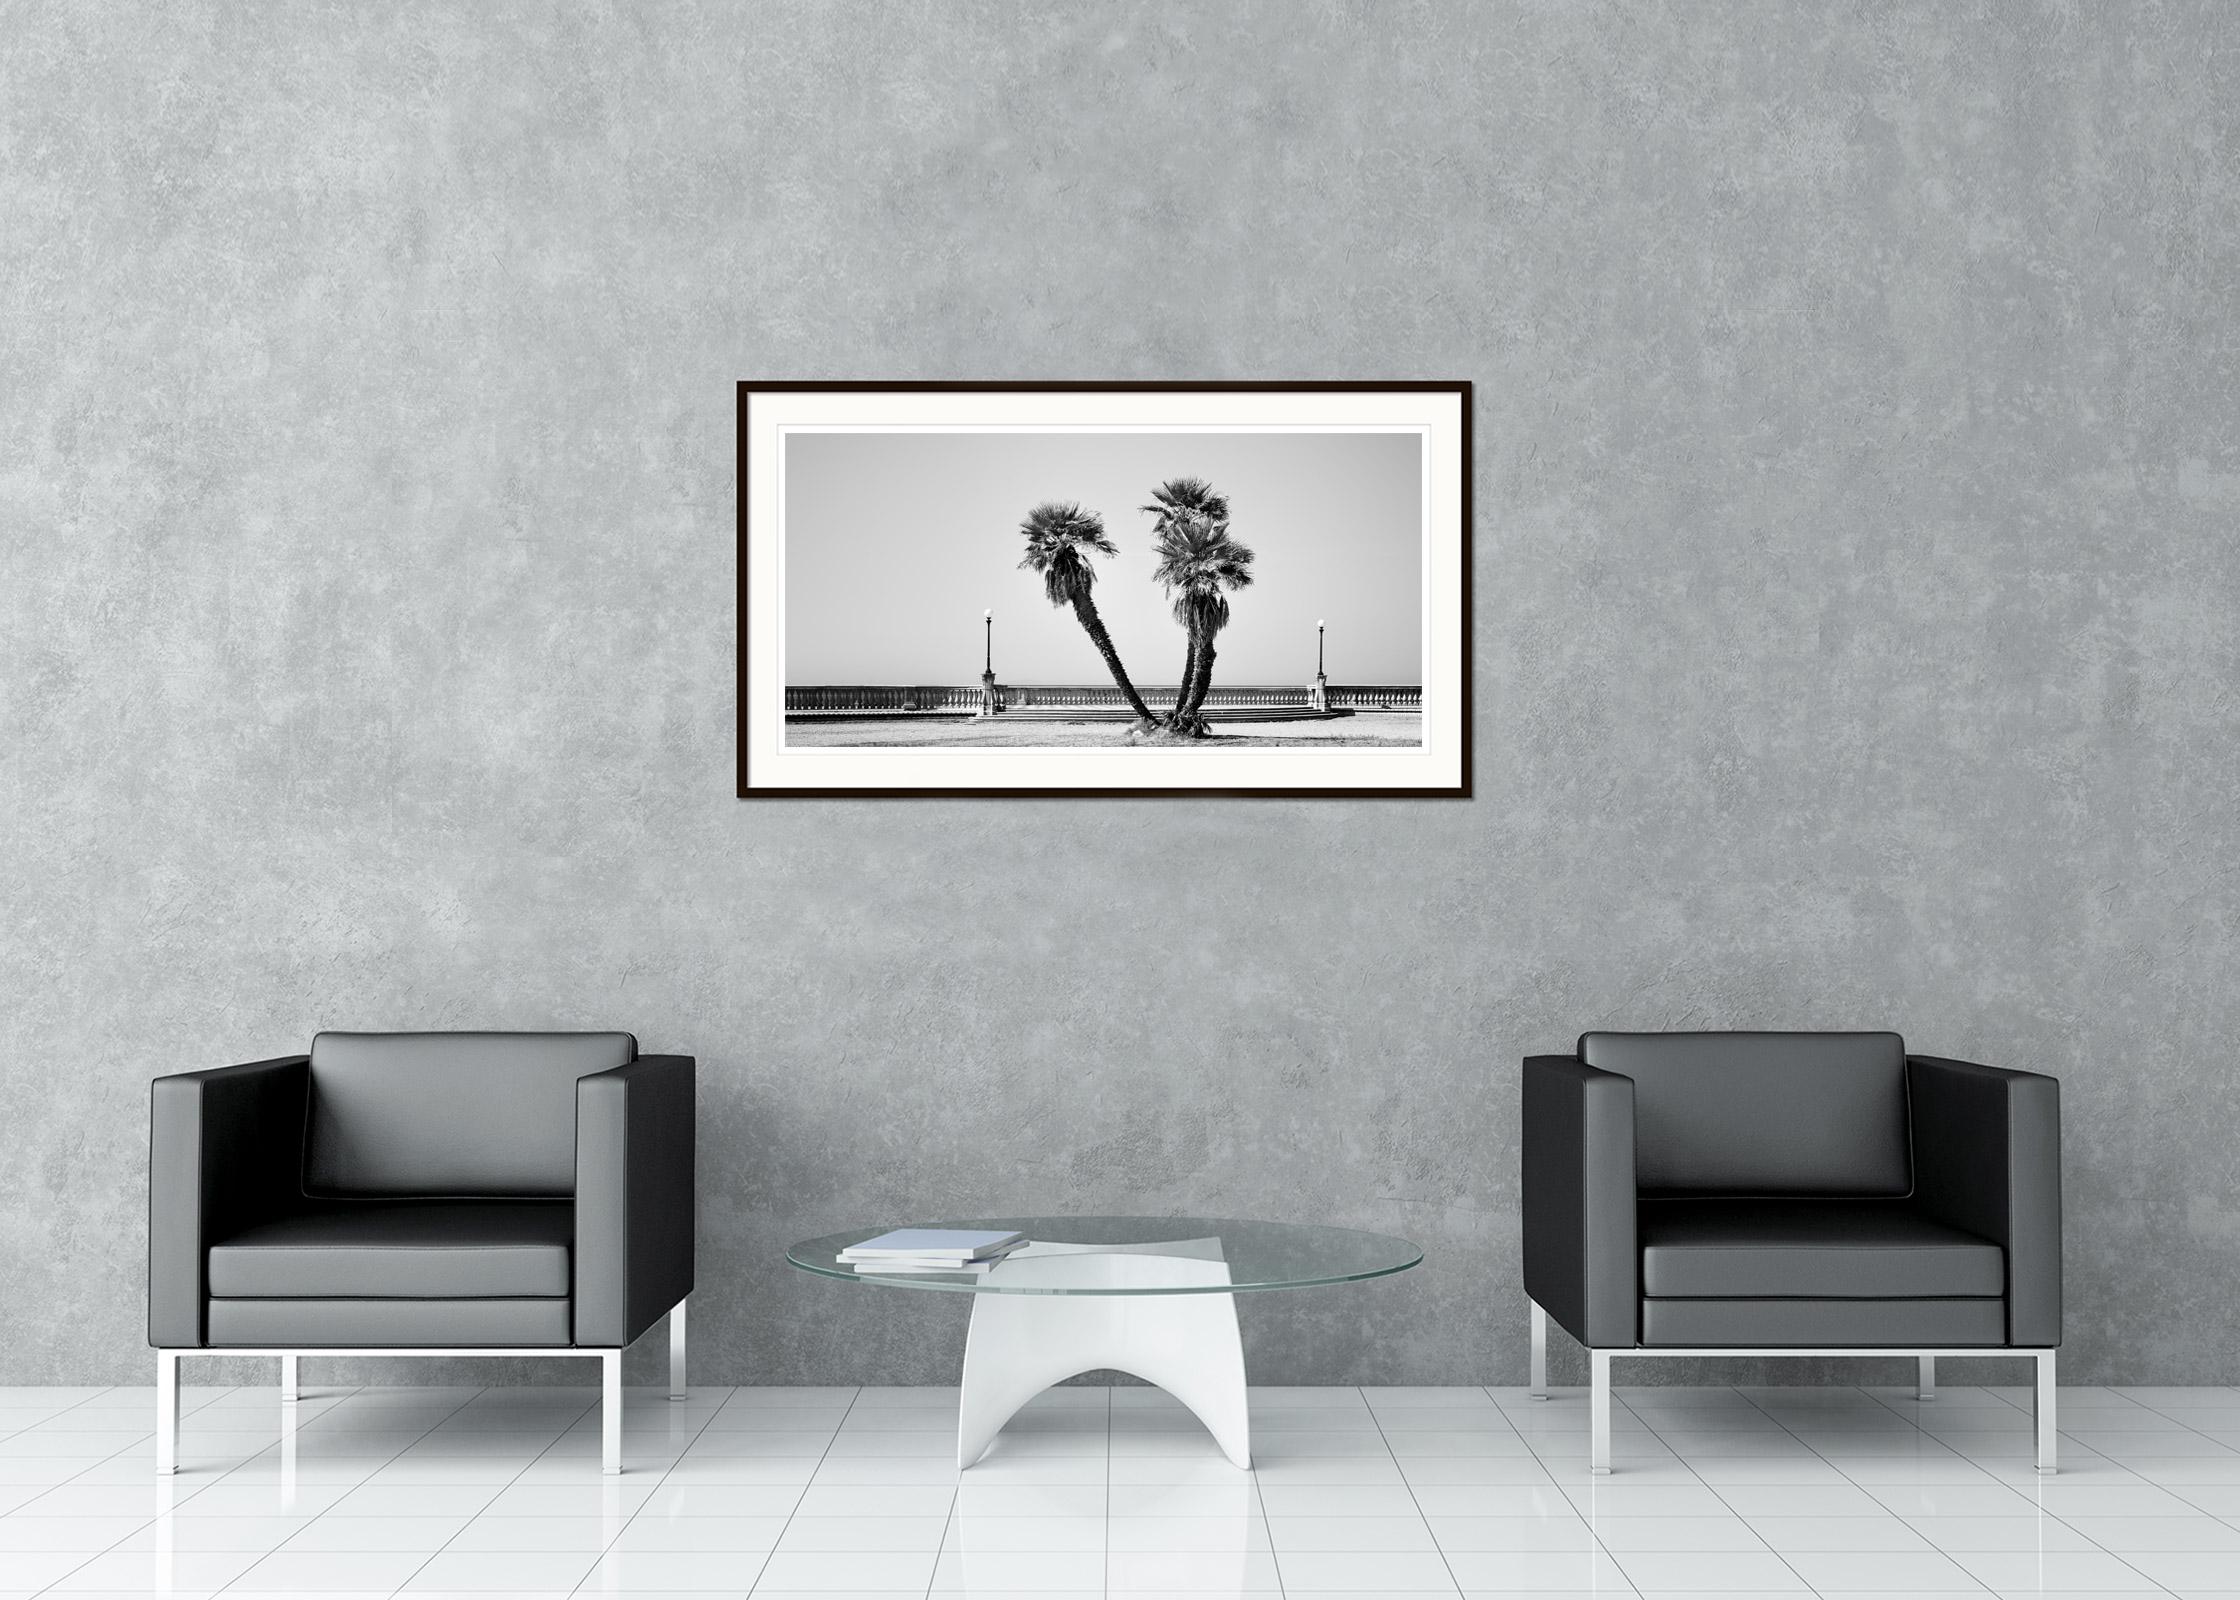 Black and white fine art panorama landscape photography. Palm trees on the impressive promenade Terrazza Mascagni in Tuscany, Italy. Archival pigment ink print as part of a limited edition of 8. All Gerald Berghammer prints are made to order in